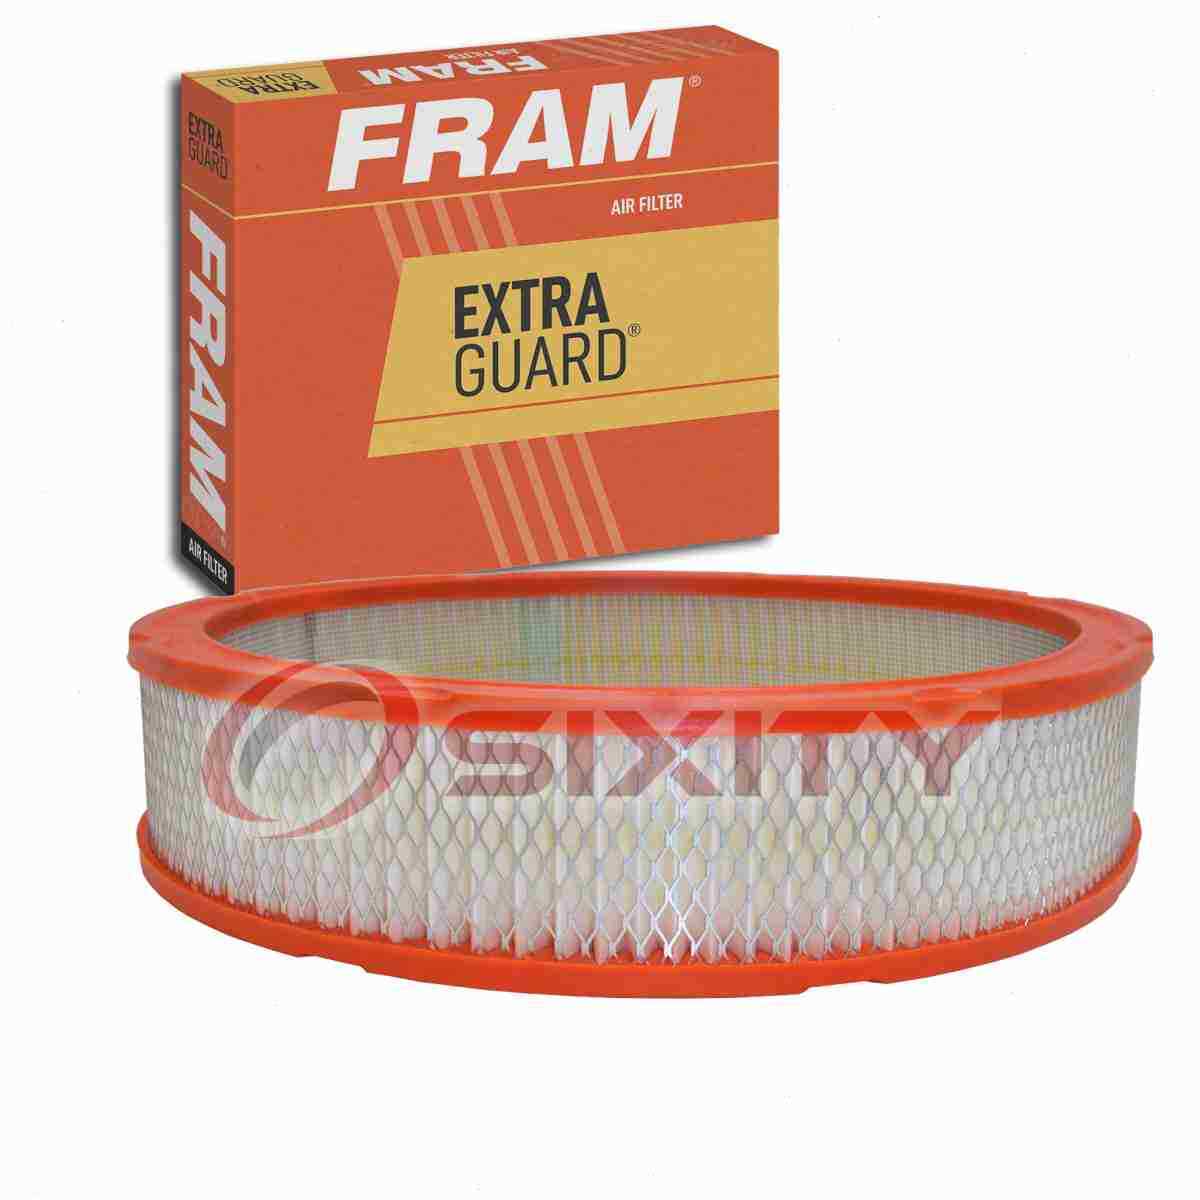 FRAM Extra Guard Air Filter for 1972-1989 Plymouth Gran Fury Intake Inlet eh